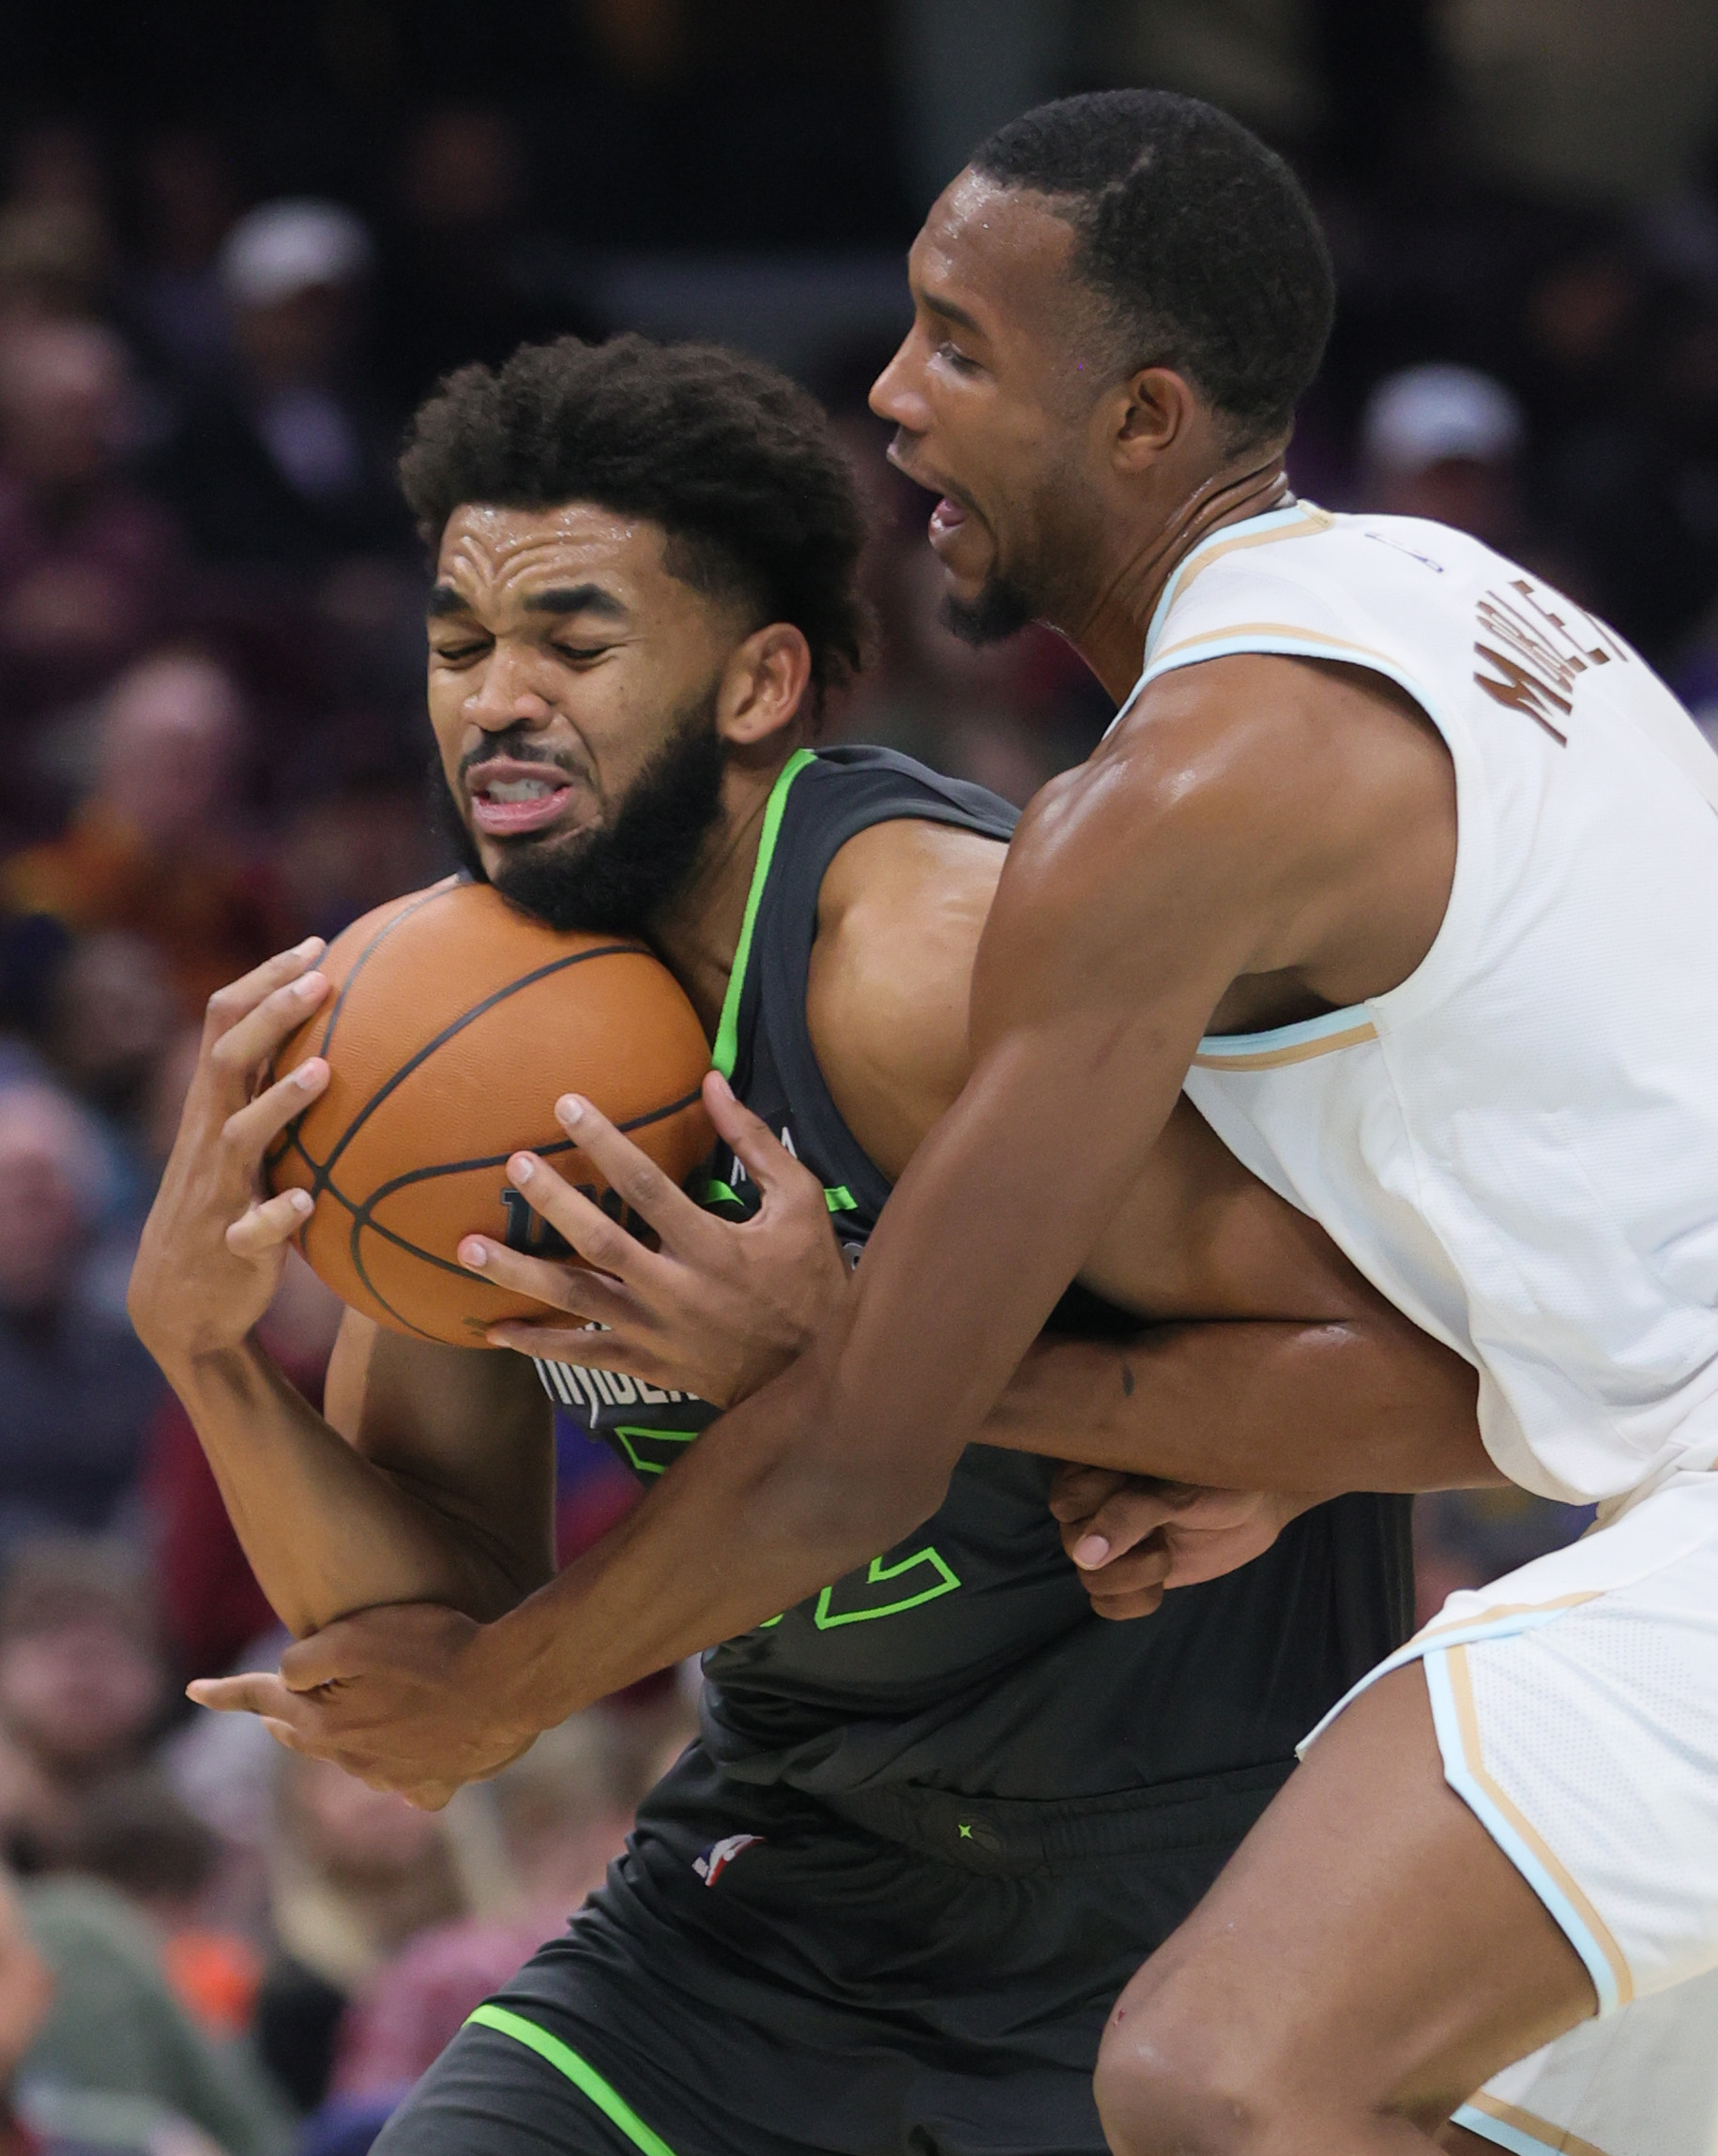 Garland's game-winning FT lifts Cavaliers to 102-101 win over